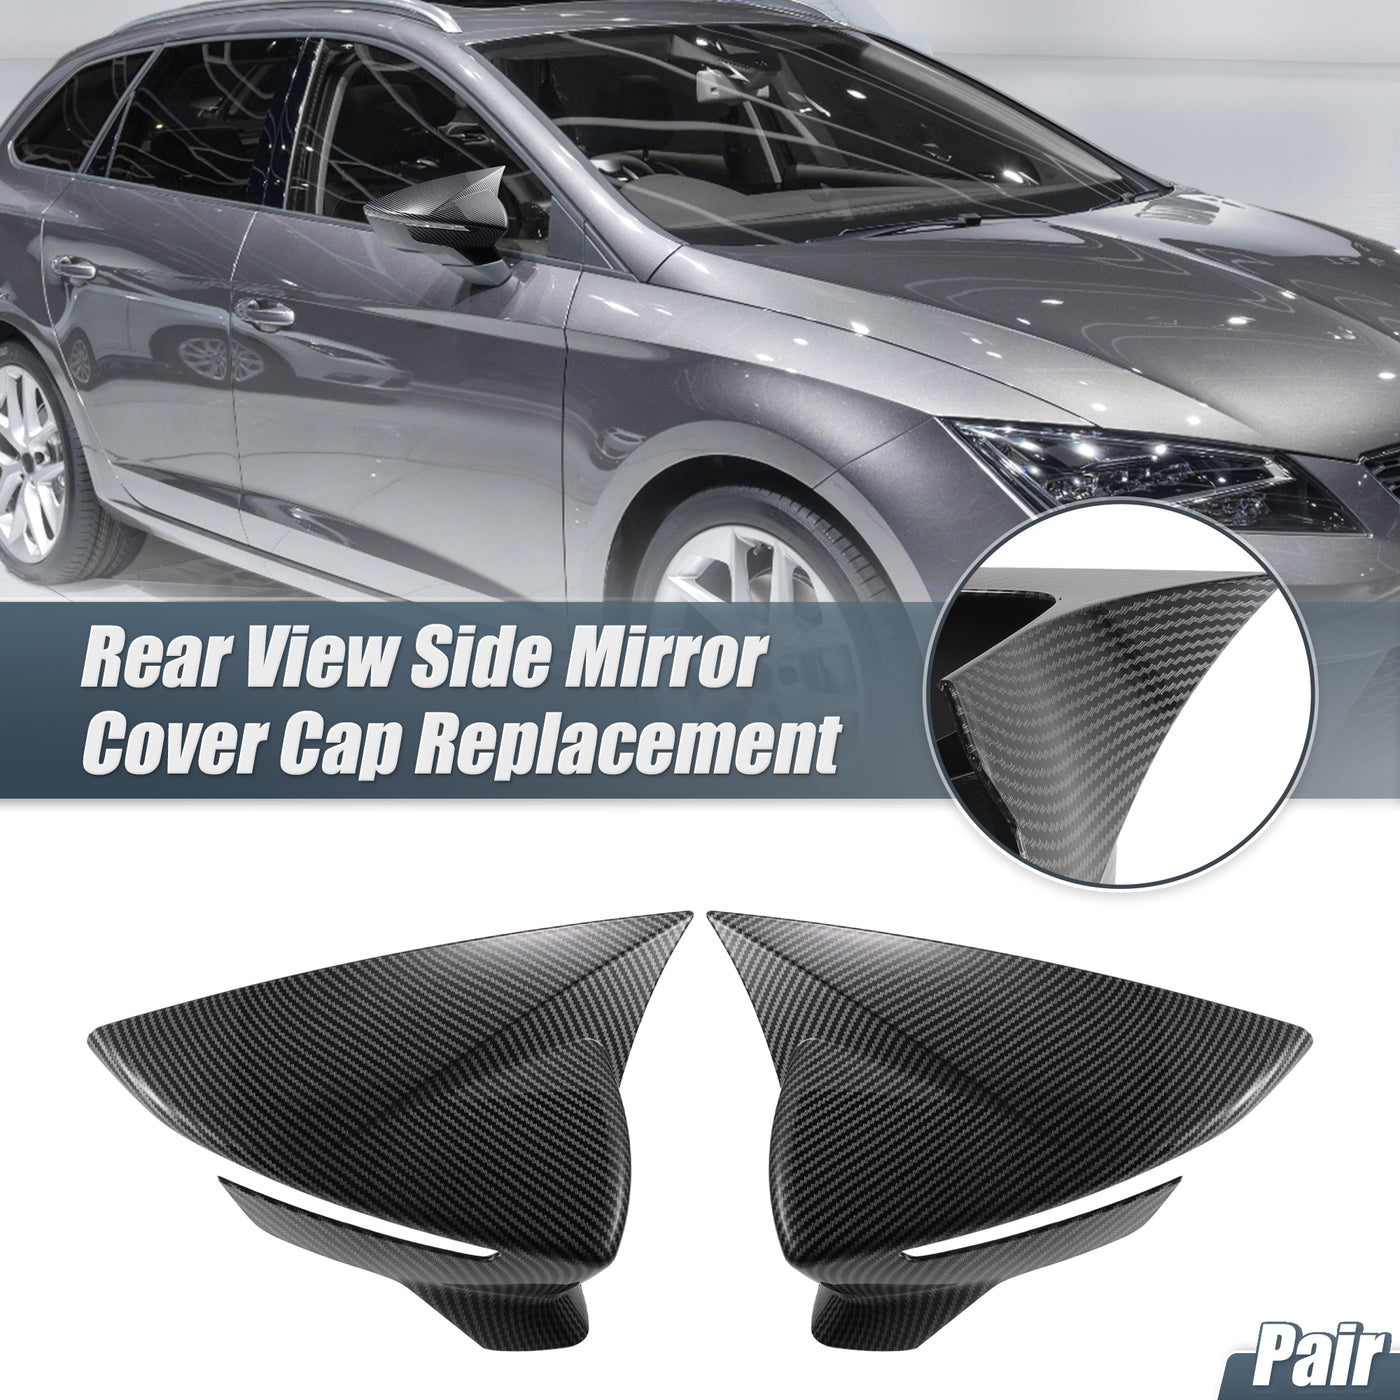 X AUTOHAUX Pair Car Rear View Driver Passenger Side Mirror Cover Cap Overlay Black Carbon Fiber Pattern for SEAT Leon MK3 5F Ibiza MK5 2013-2019 for Models with Turn Signal Light